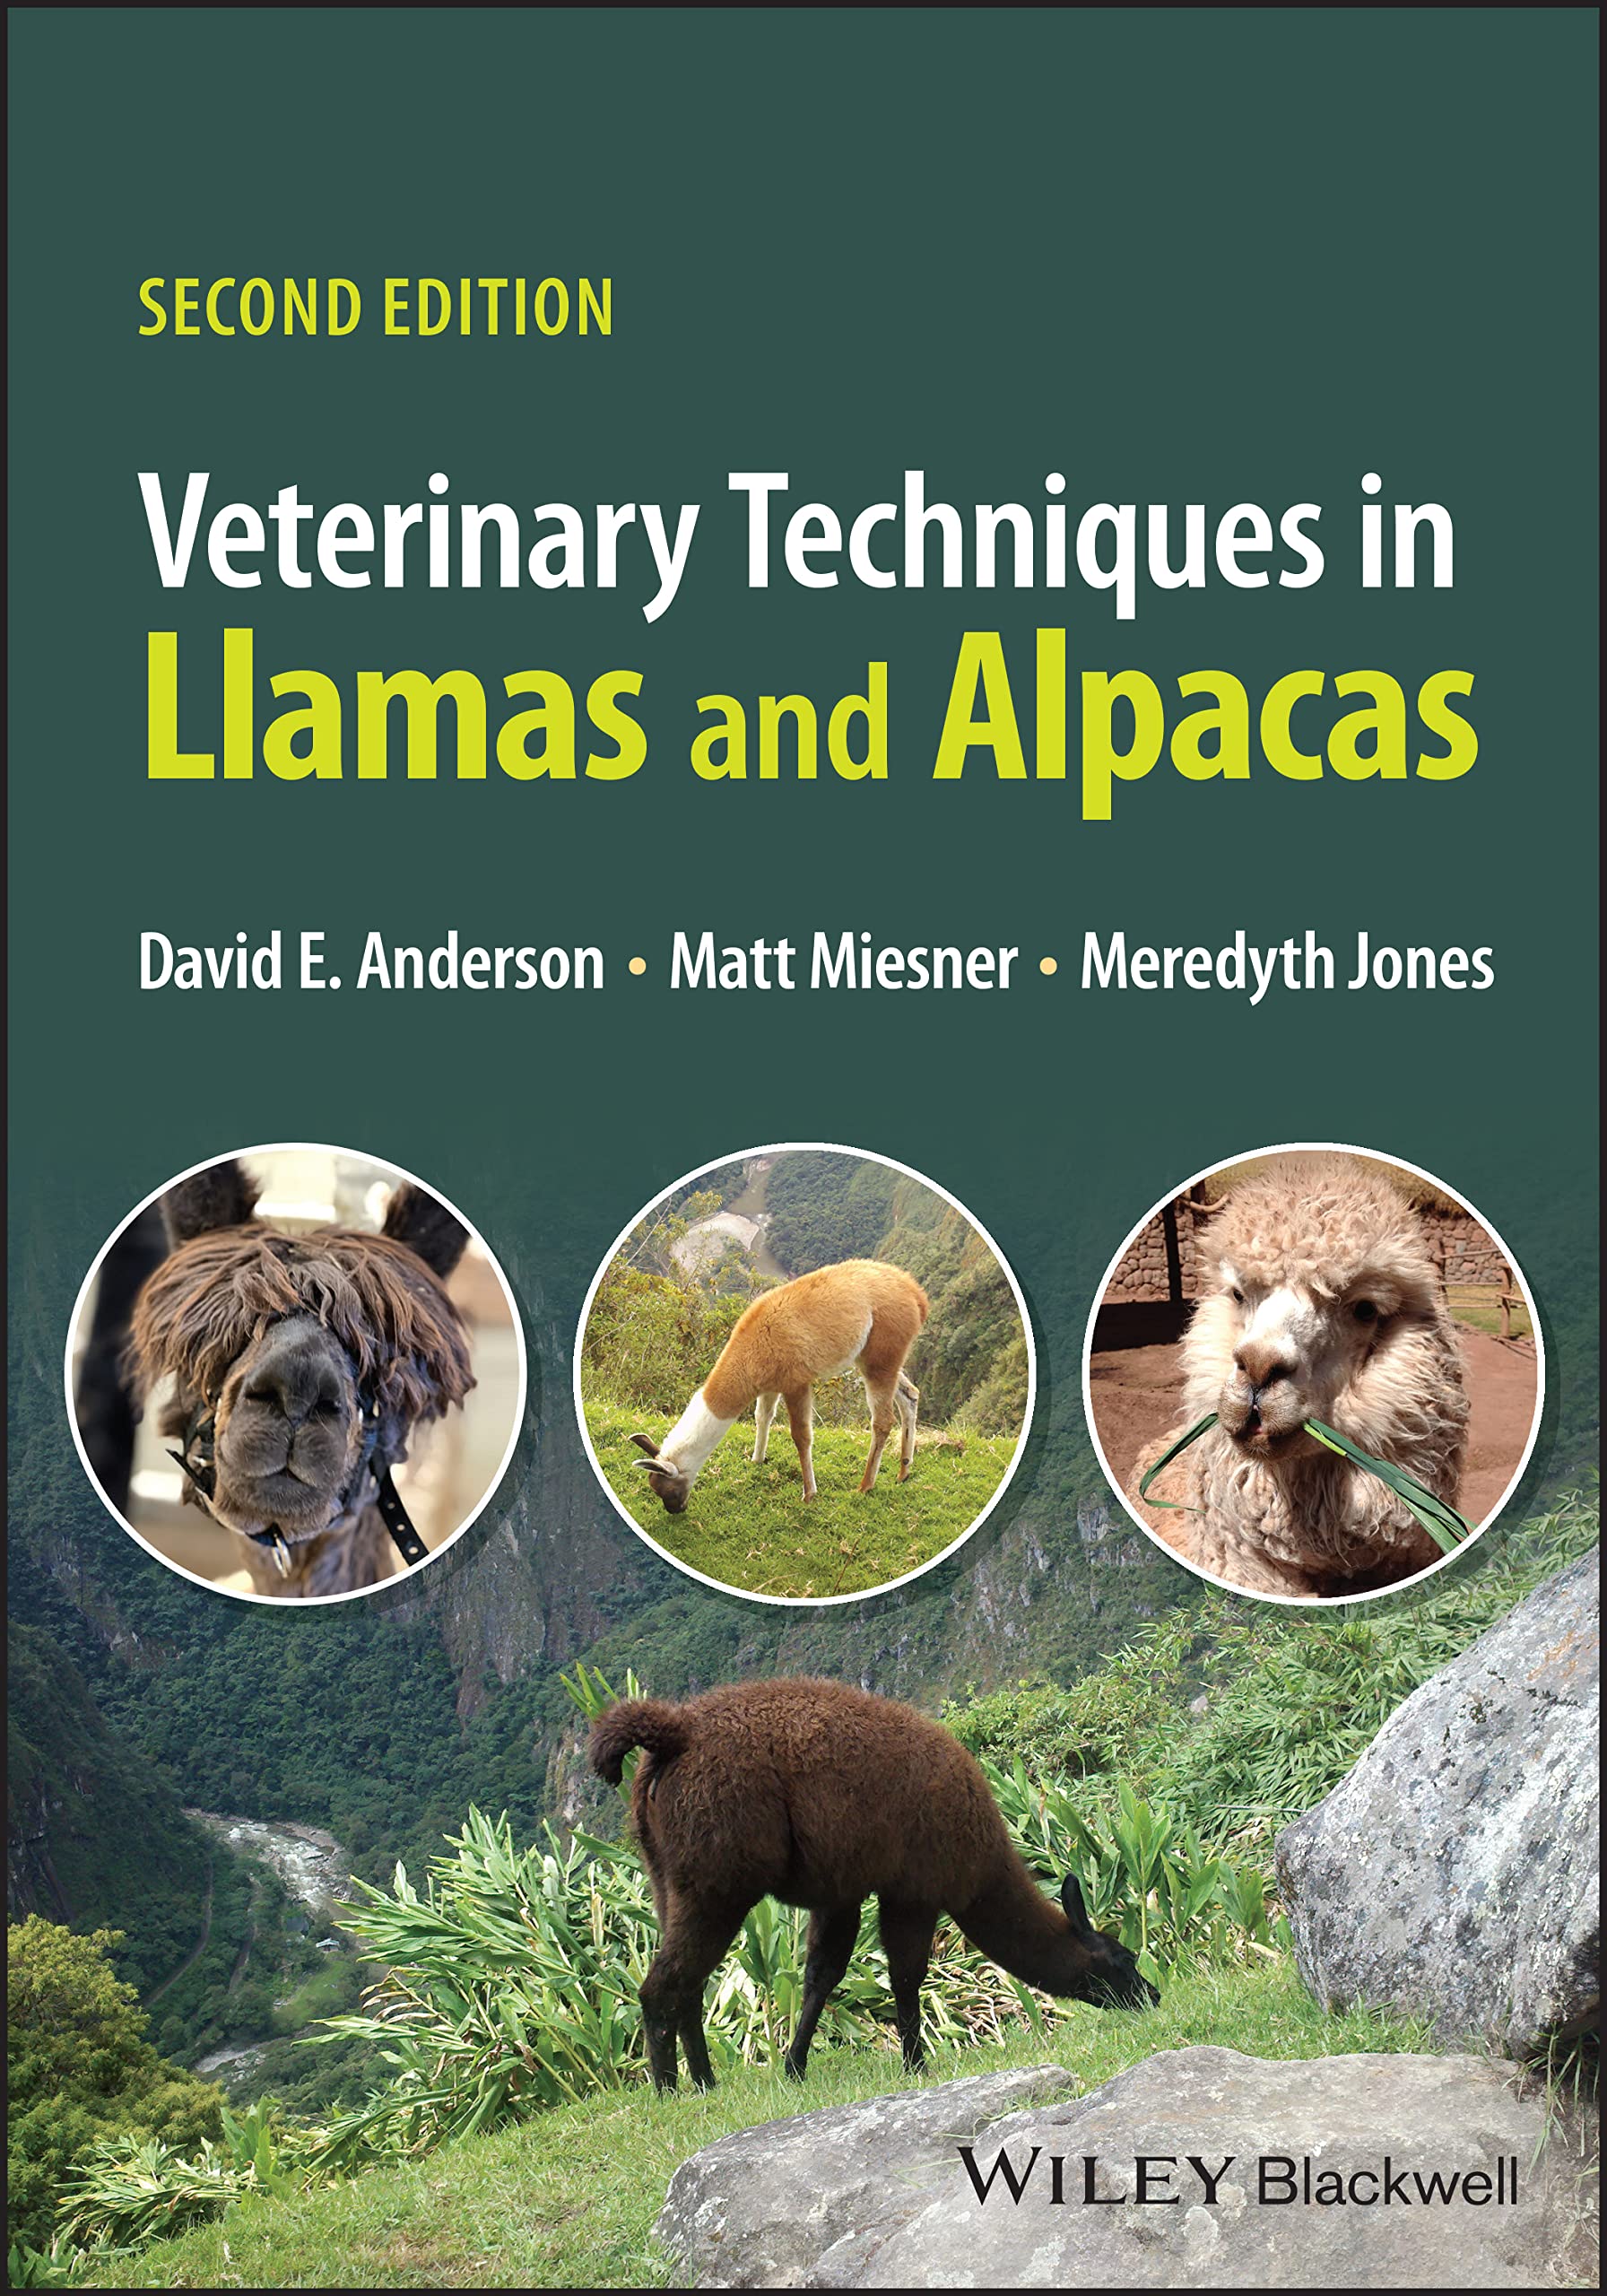 Veterinary Techniques in Llamas and Alpacas, 2nd Edition  by David E. Anderson 